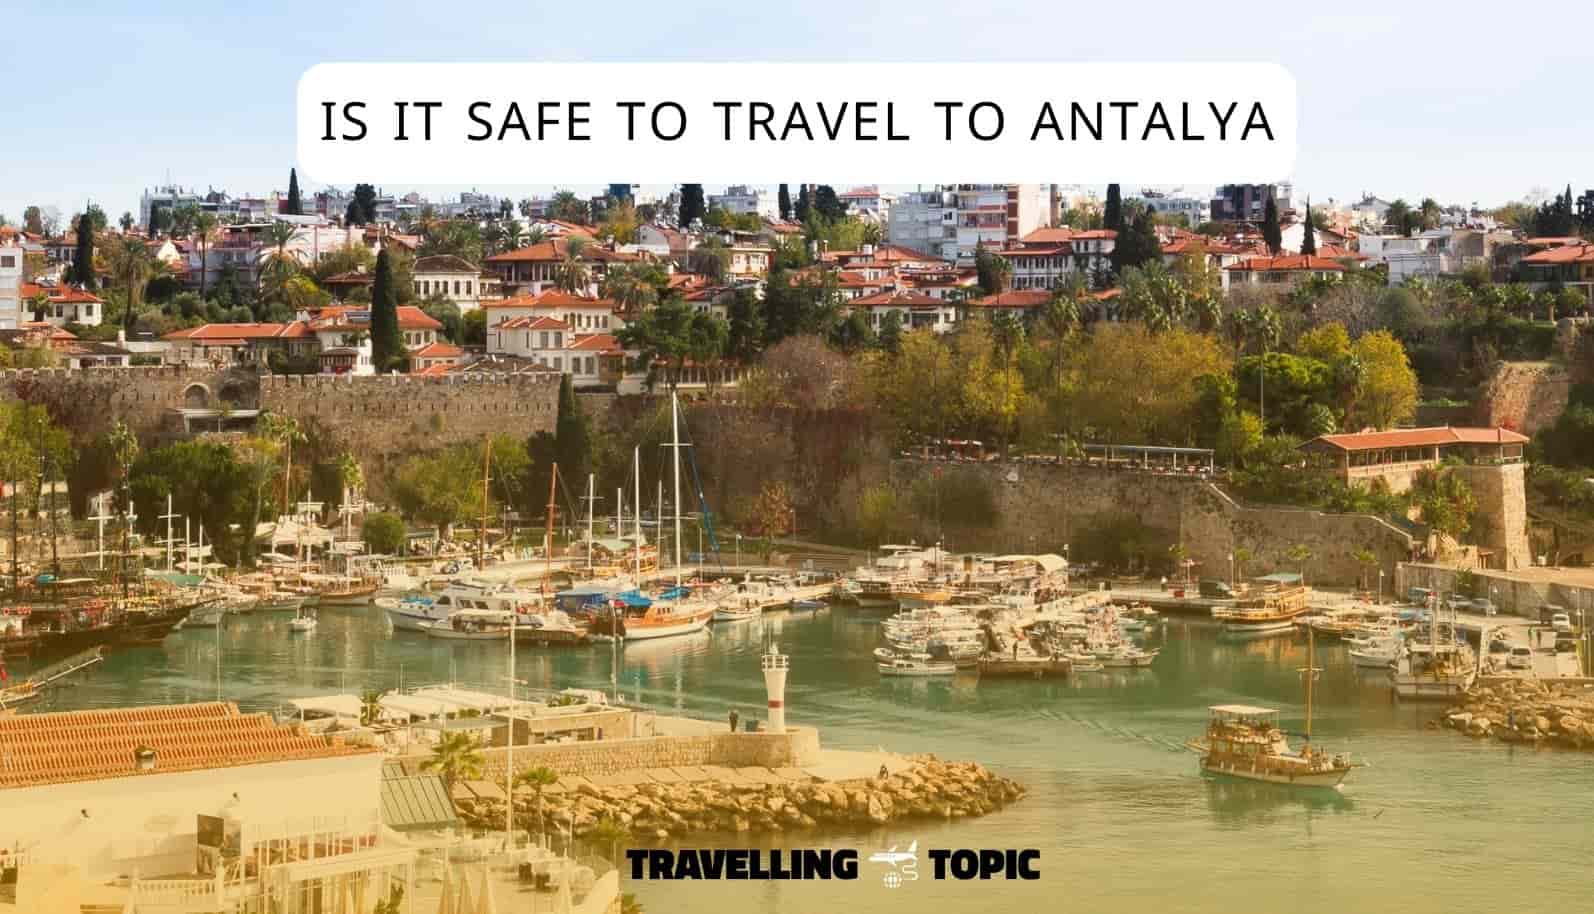 is it safe to travel to antalya